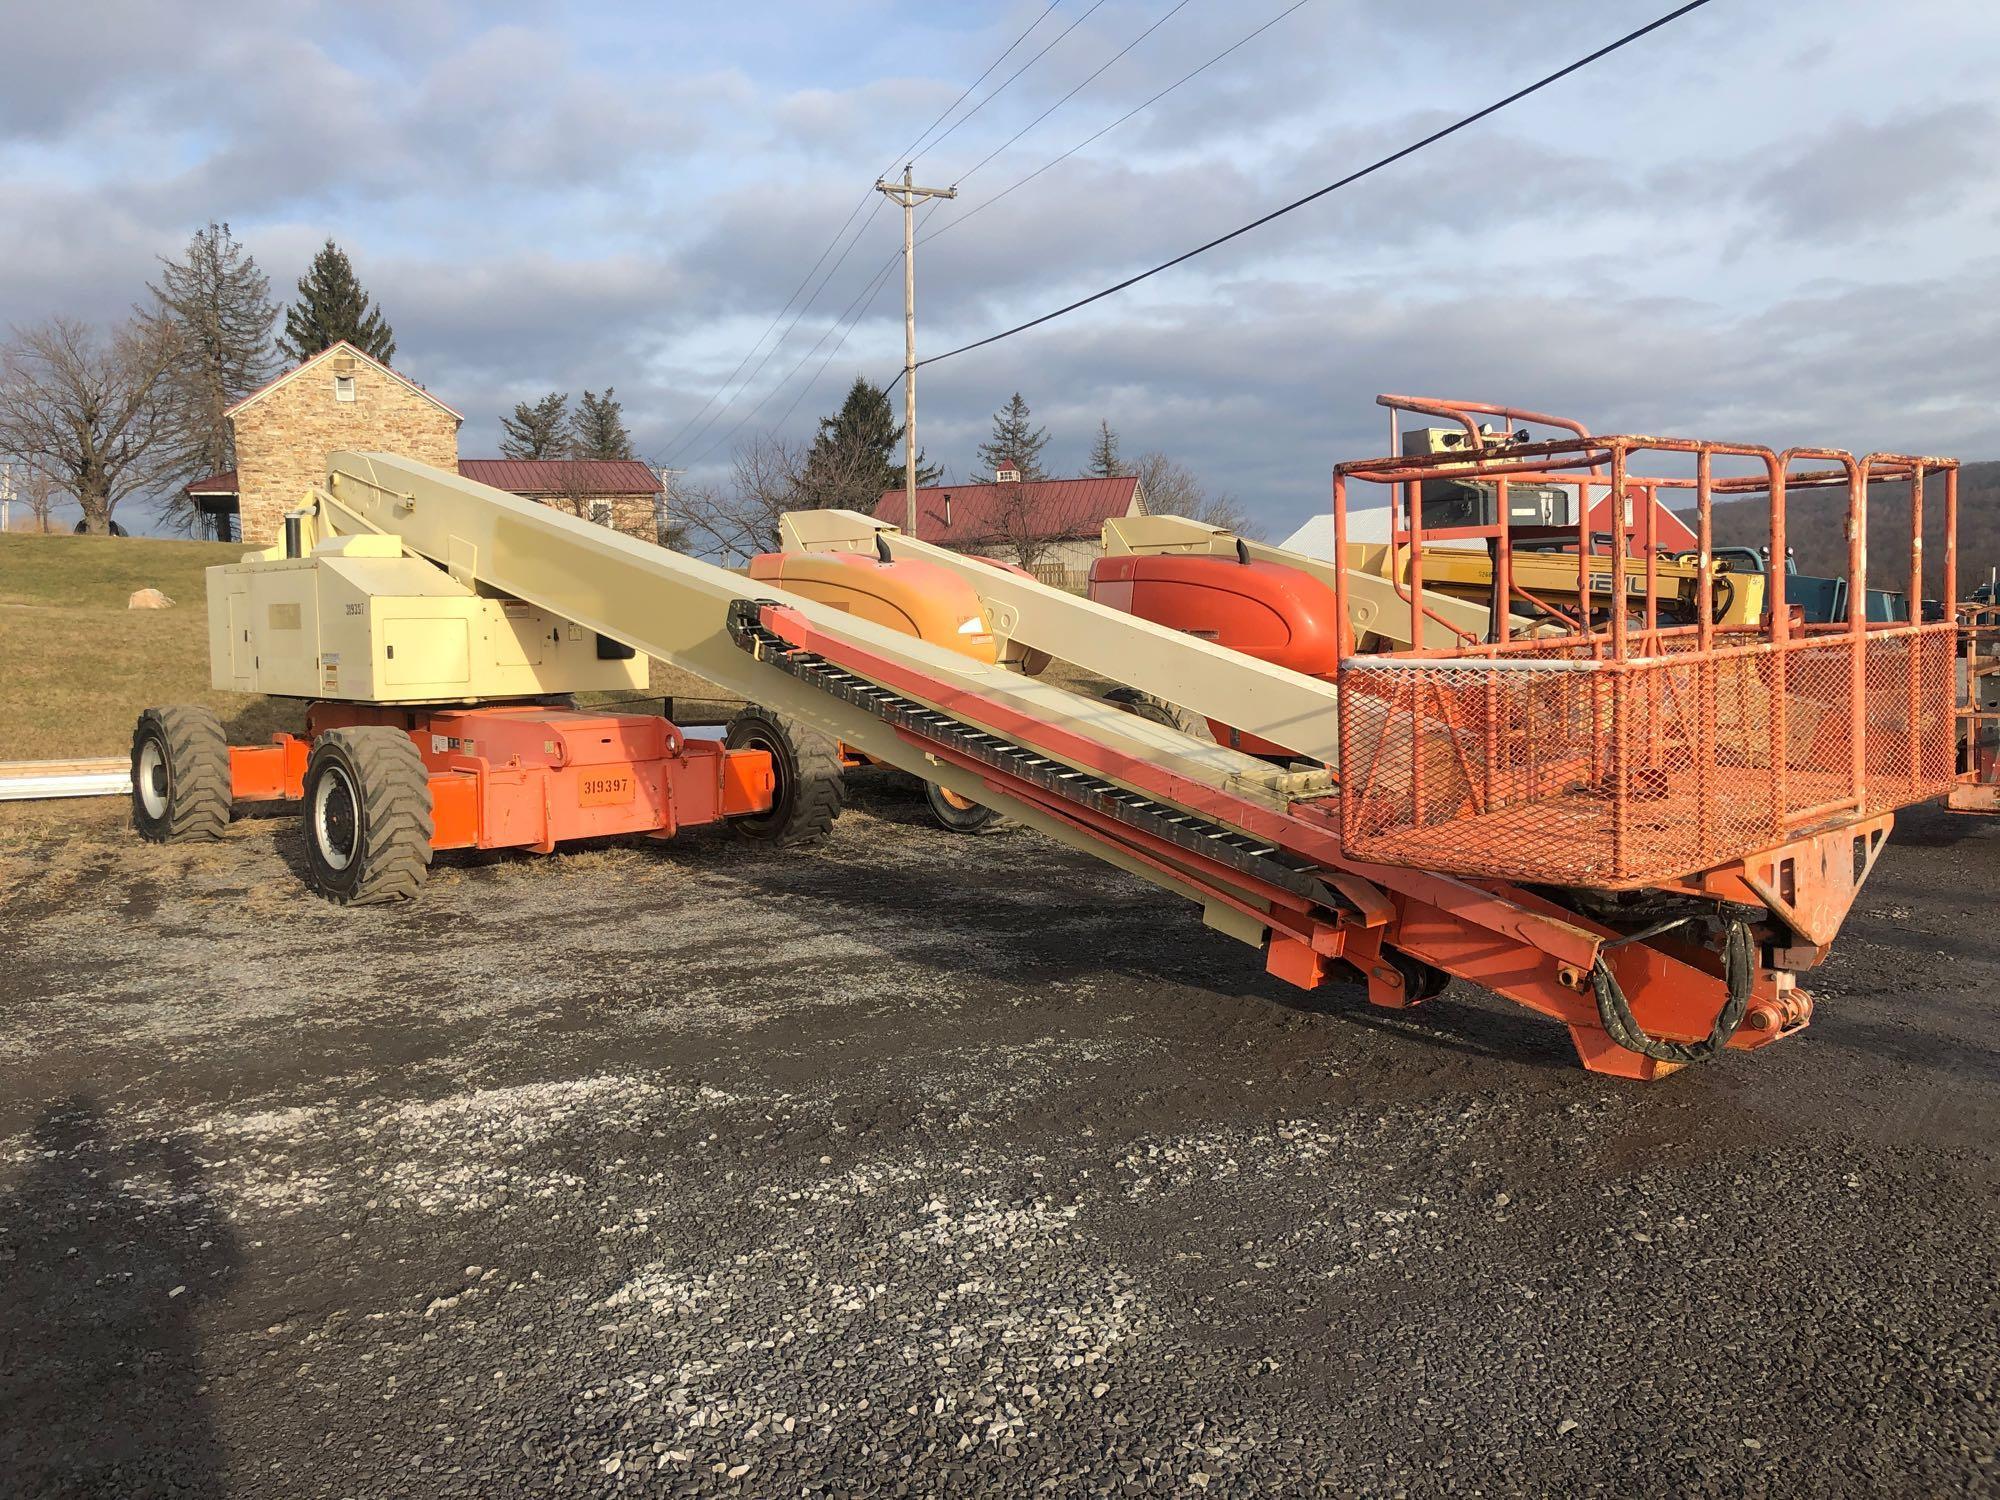 JLG model 2000 with 5014 hours reconditioned Diesel engine